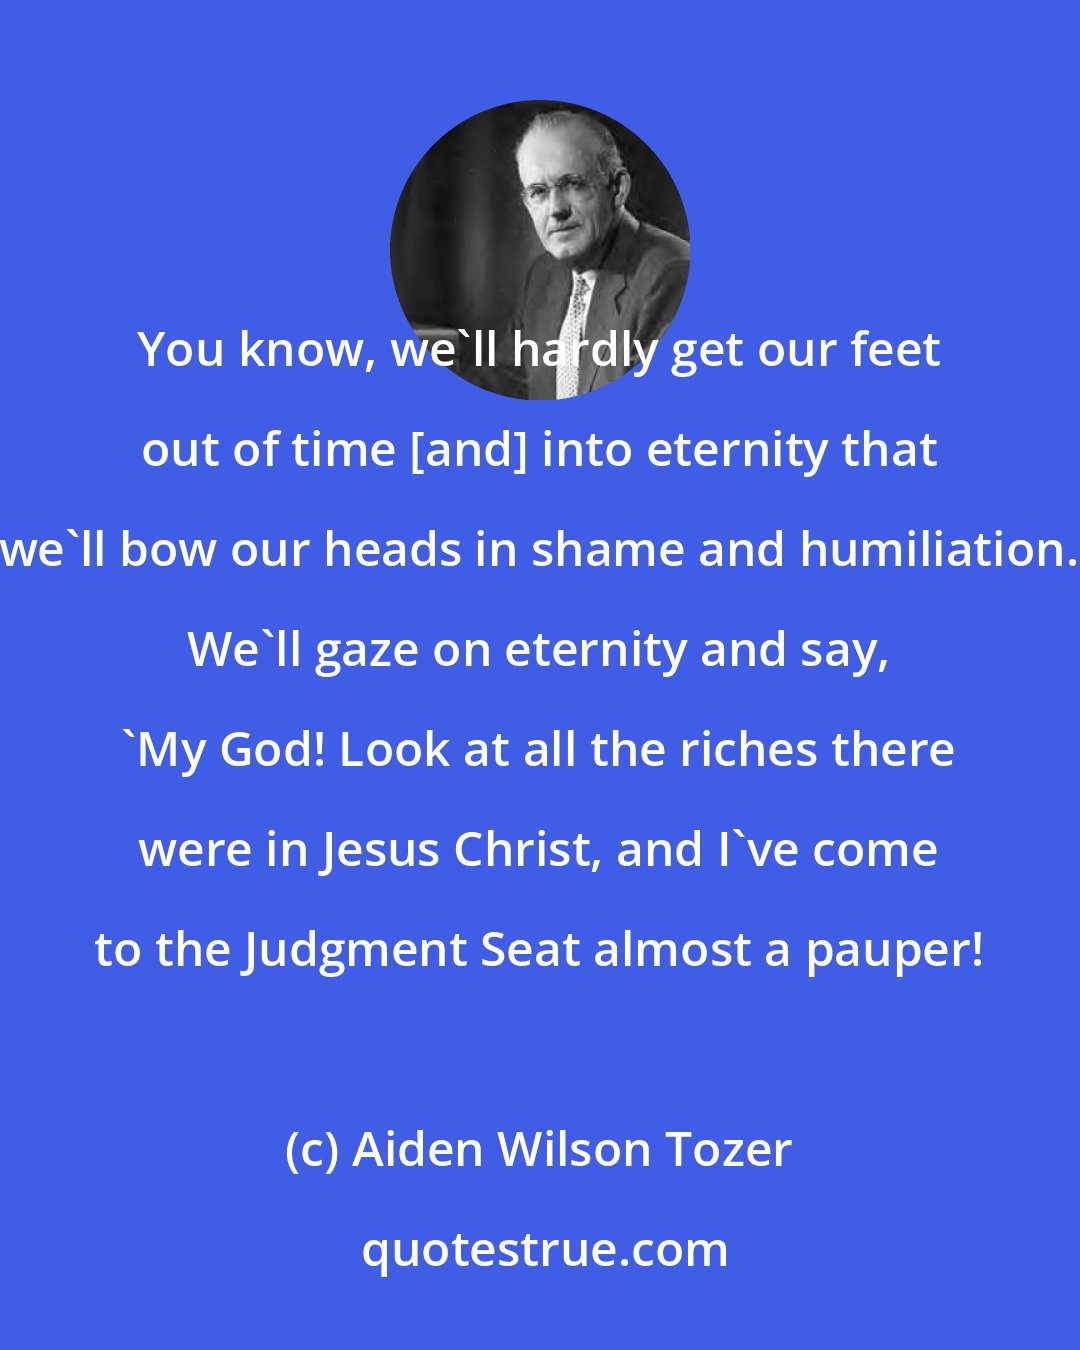 Aiden Wilson Tozer: You know, we'll hardly get our feet out of time [and] into eternity that we'll bow our heads in shame and humiliation. We'll gaze on eternity and say, 'My God! Look at all the riches there were in Jesus Christ, and I've come to the Judgment Seat almost a pauper!